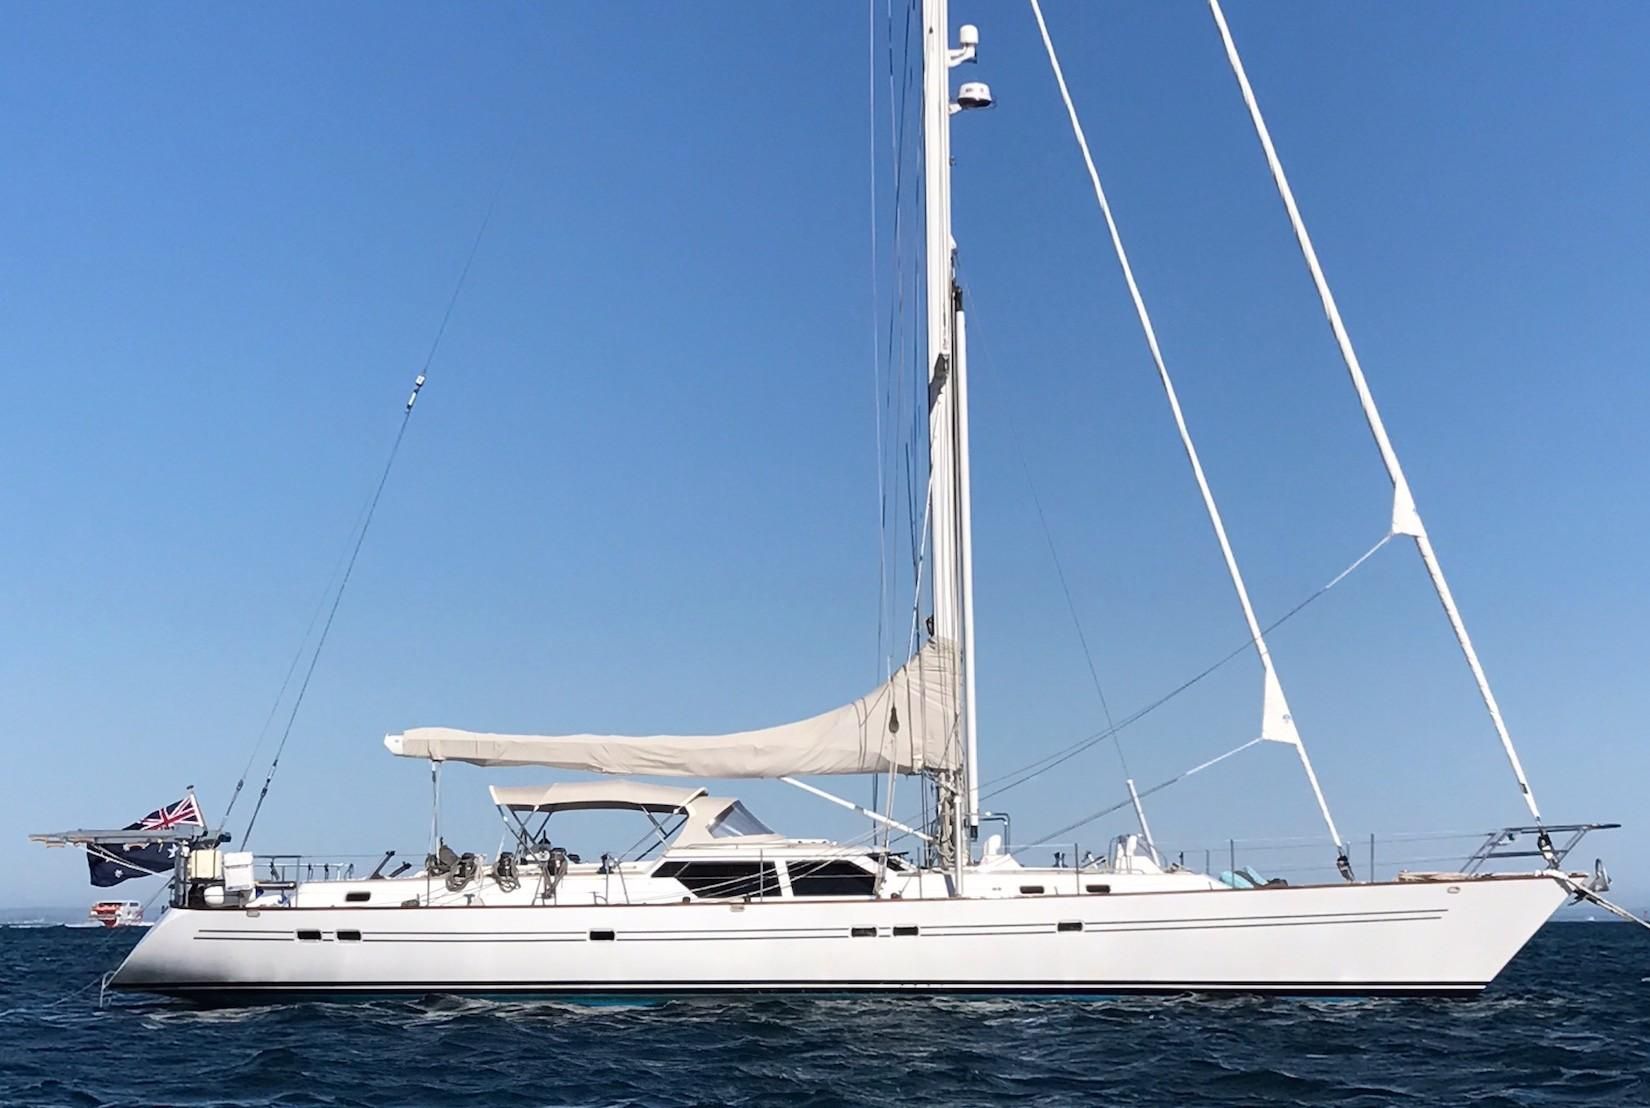 68 ft sailboat for sale